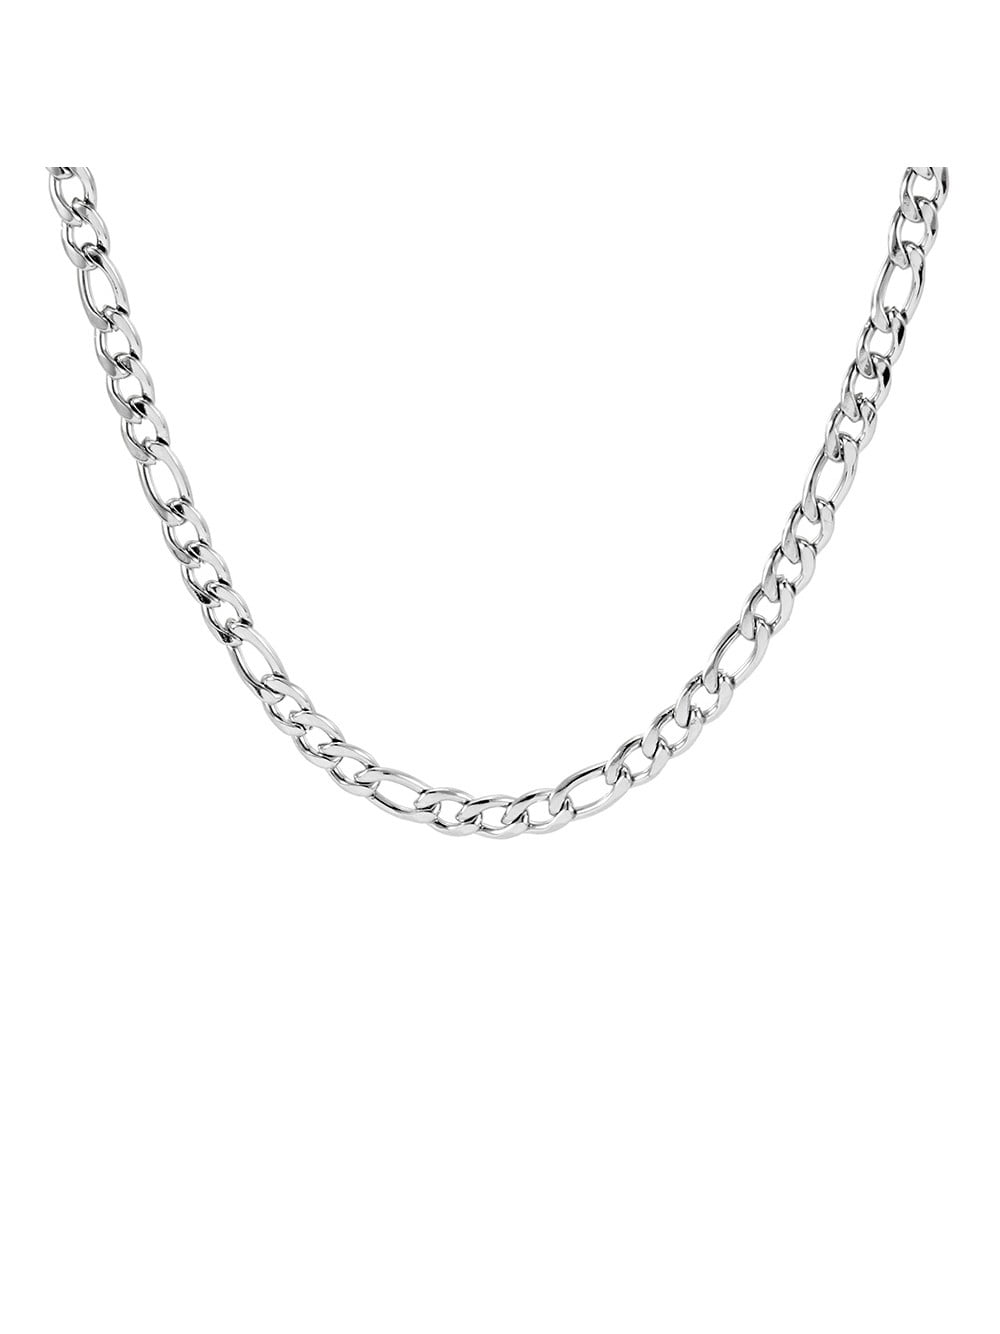 6mm Stainless Steel Figaro Chain, 24 inches inches